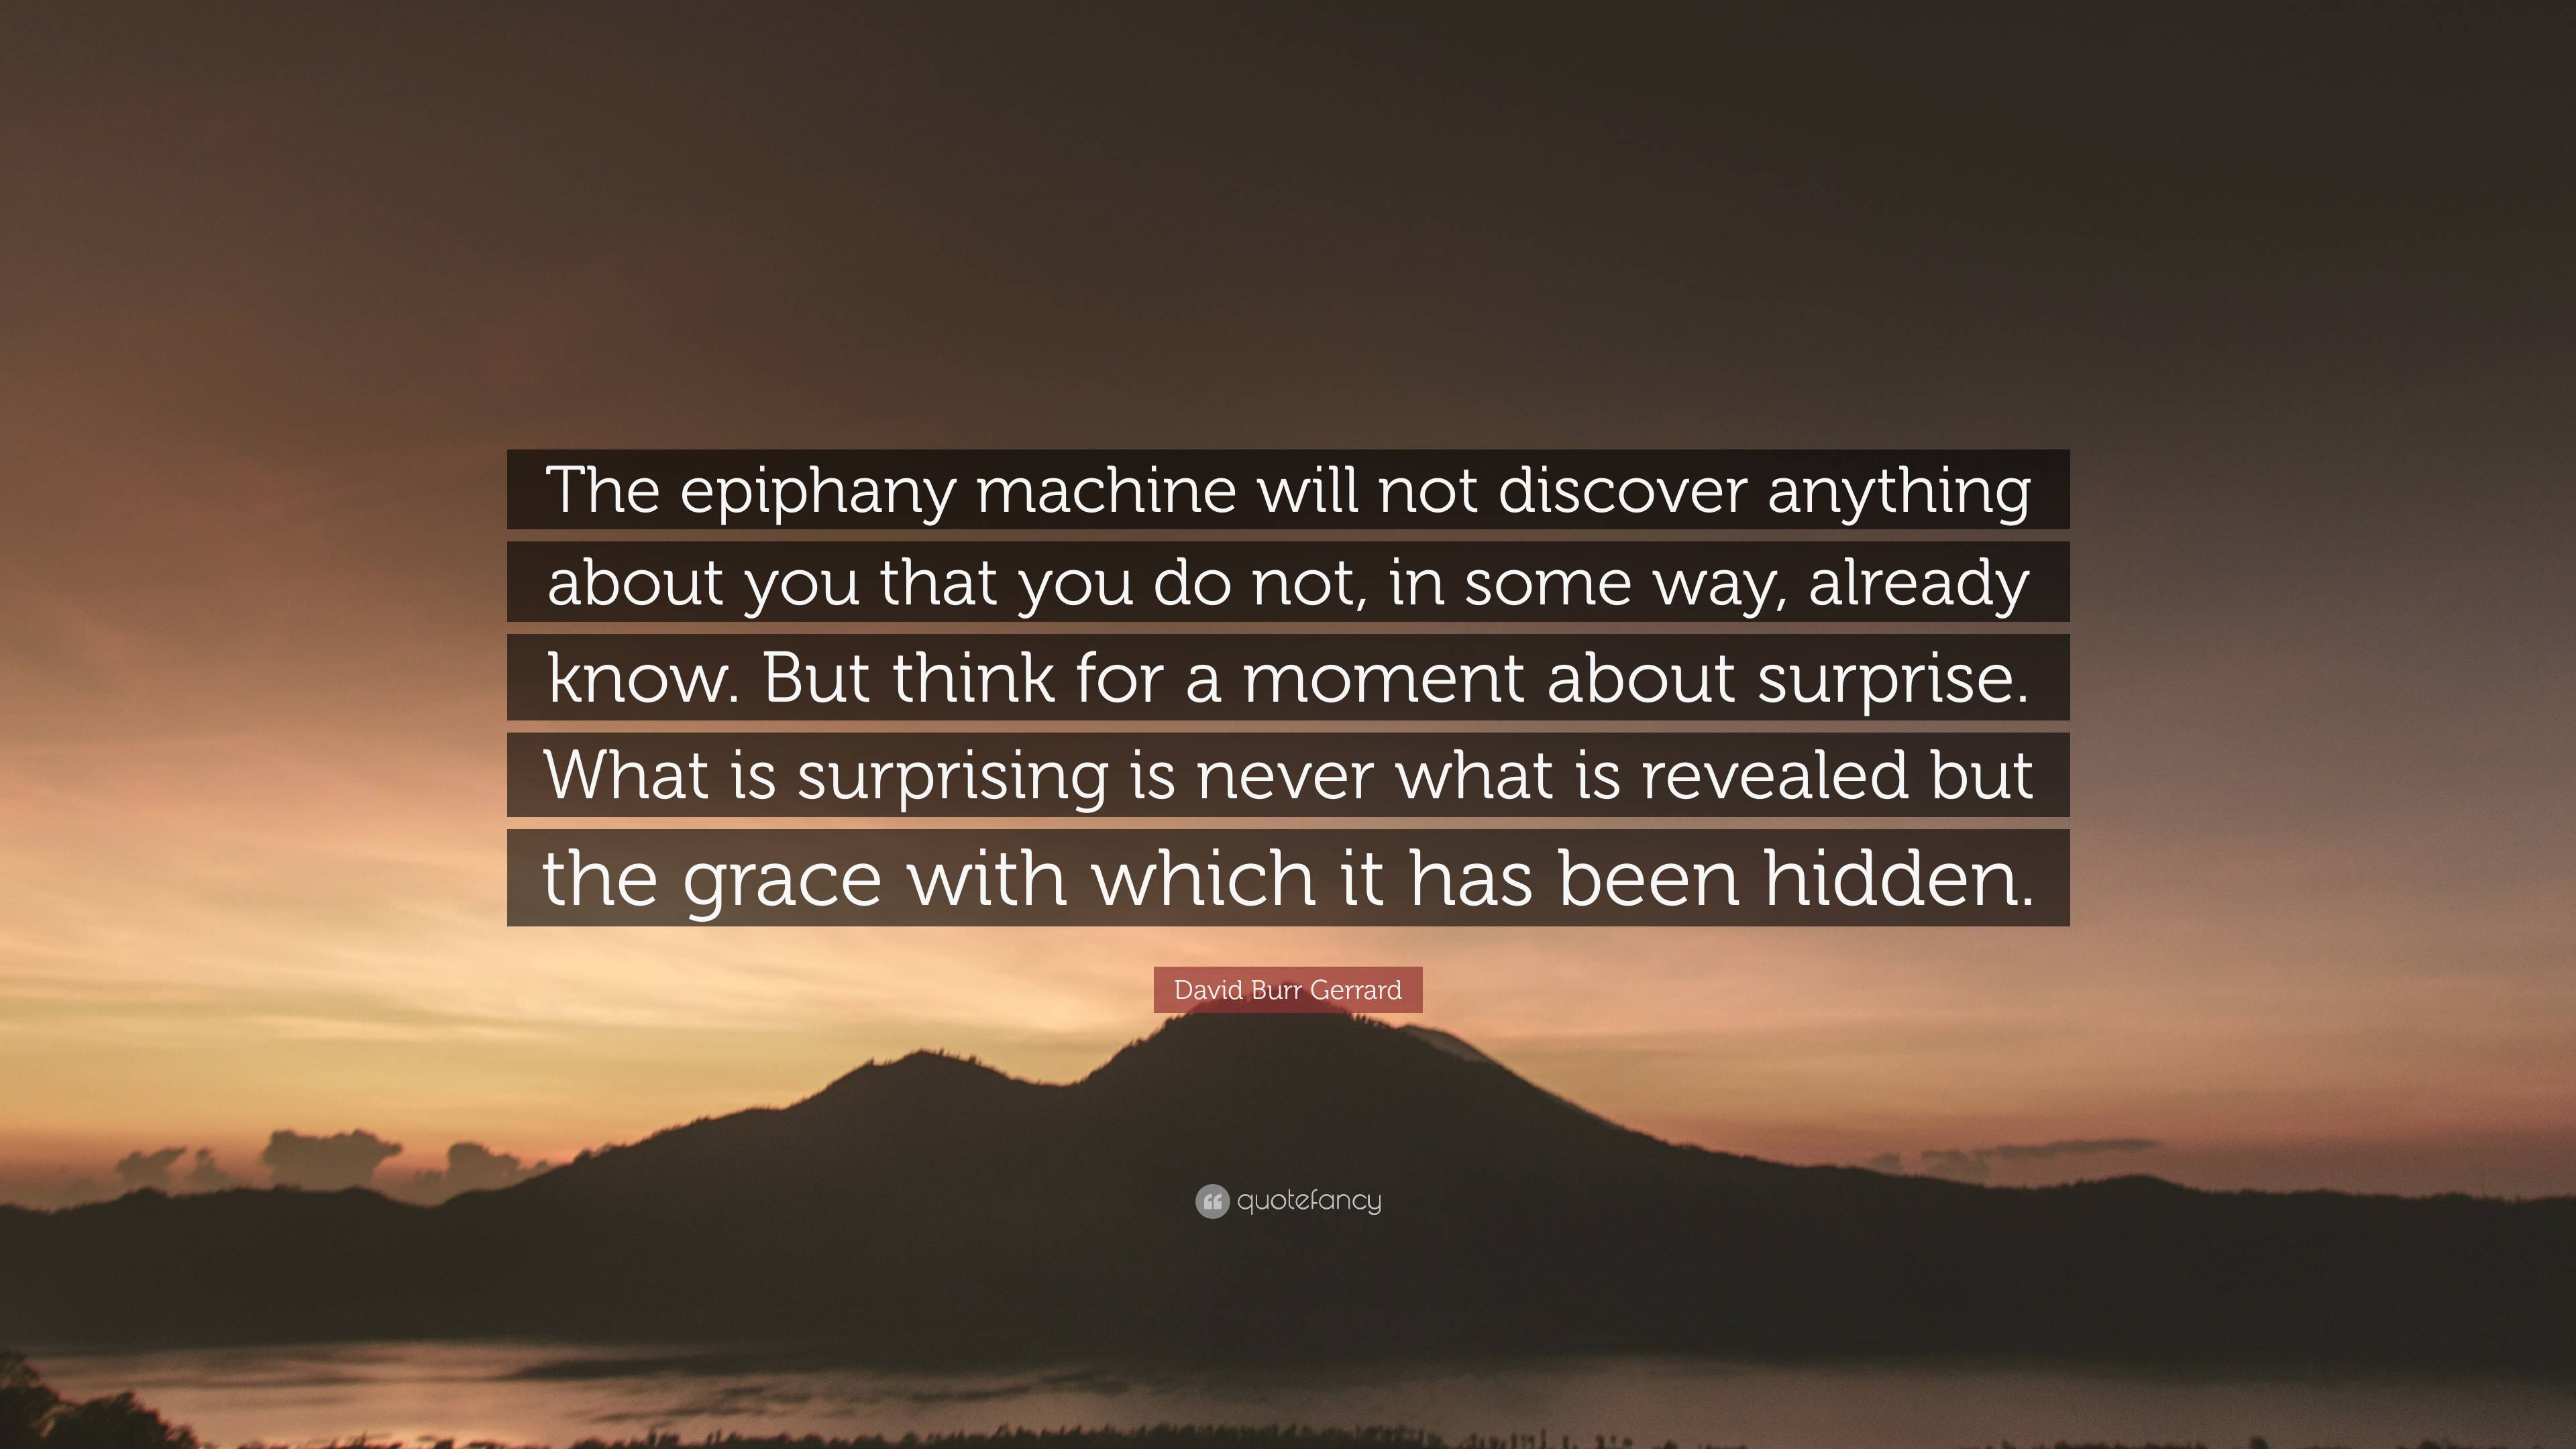 David Burr Gerrard Quote: “The epiphany machine will not discover ...